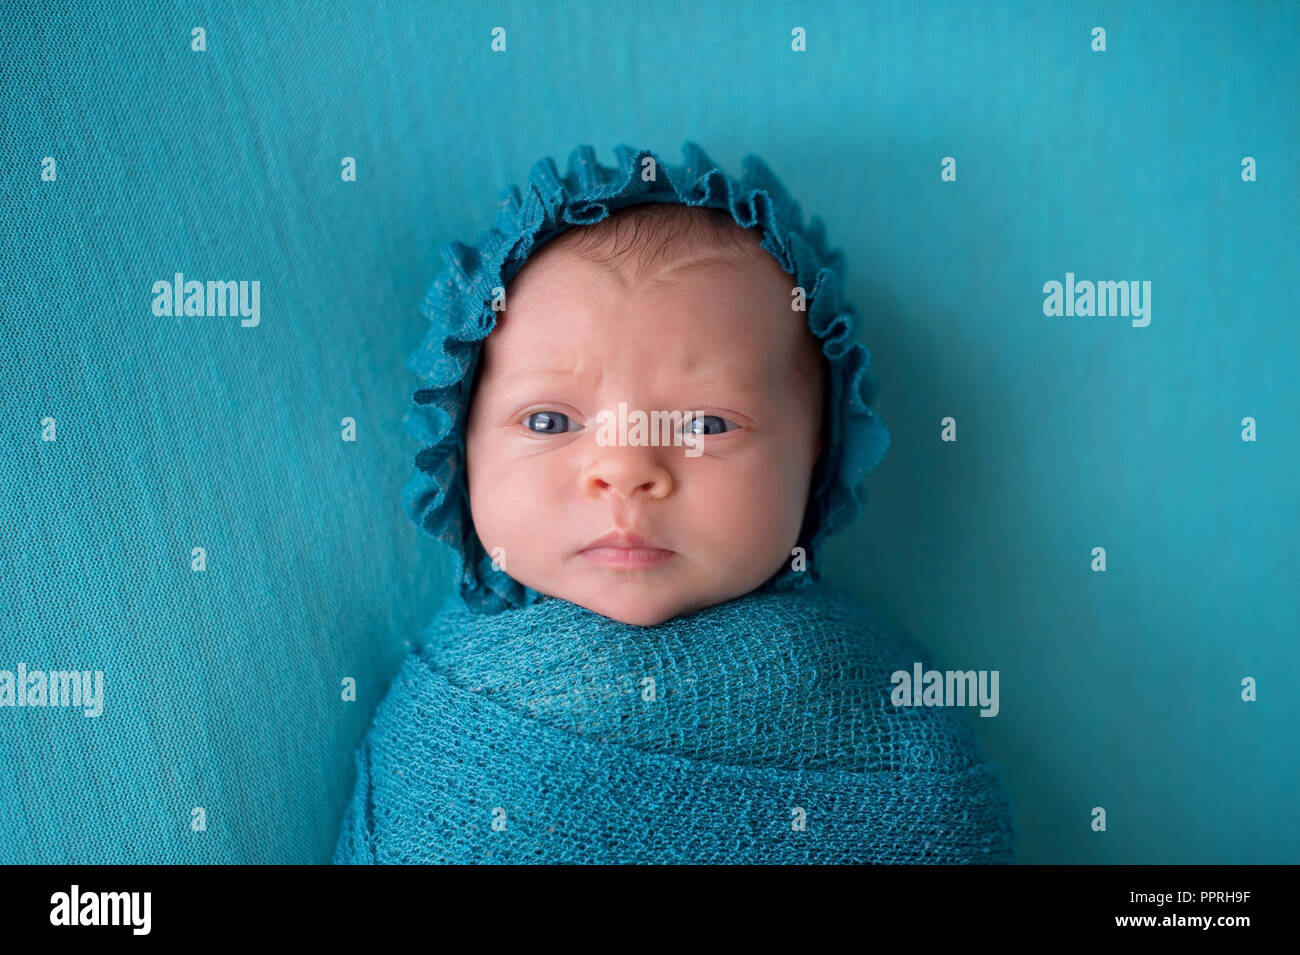 An alert, three week old, newborn baby girl wearing a turquoise blue bonnet with a perplexed expression. Stock Photo